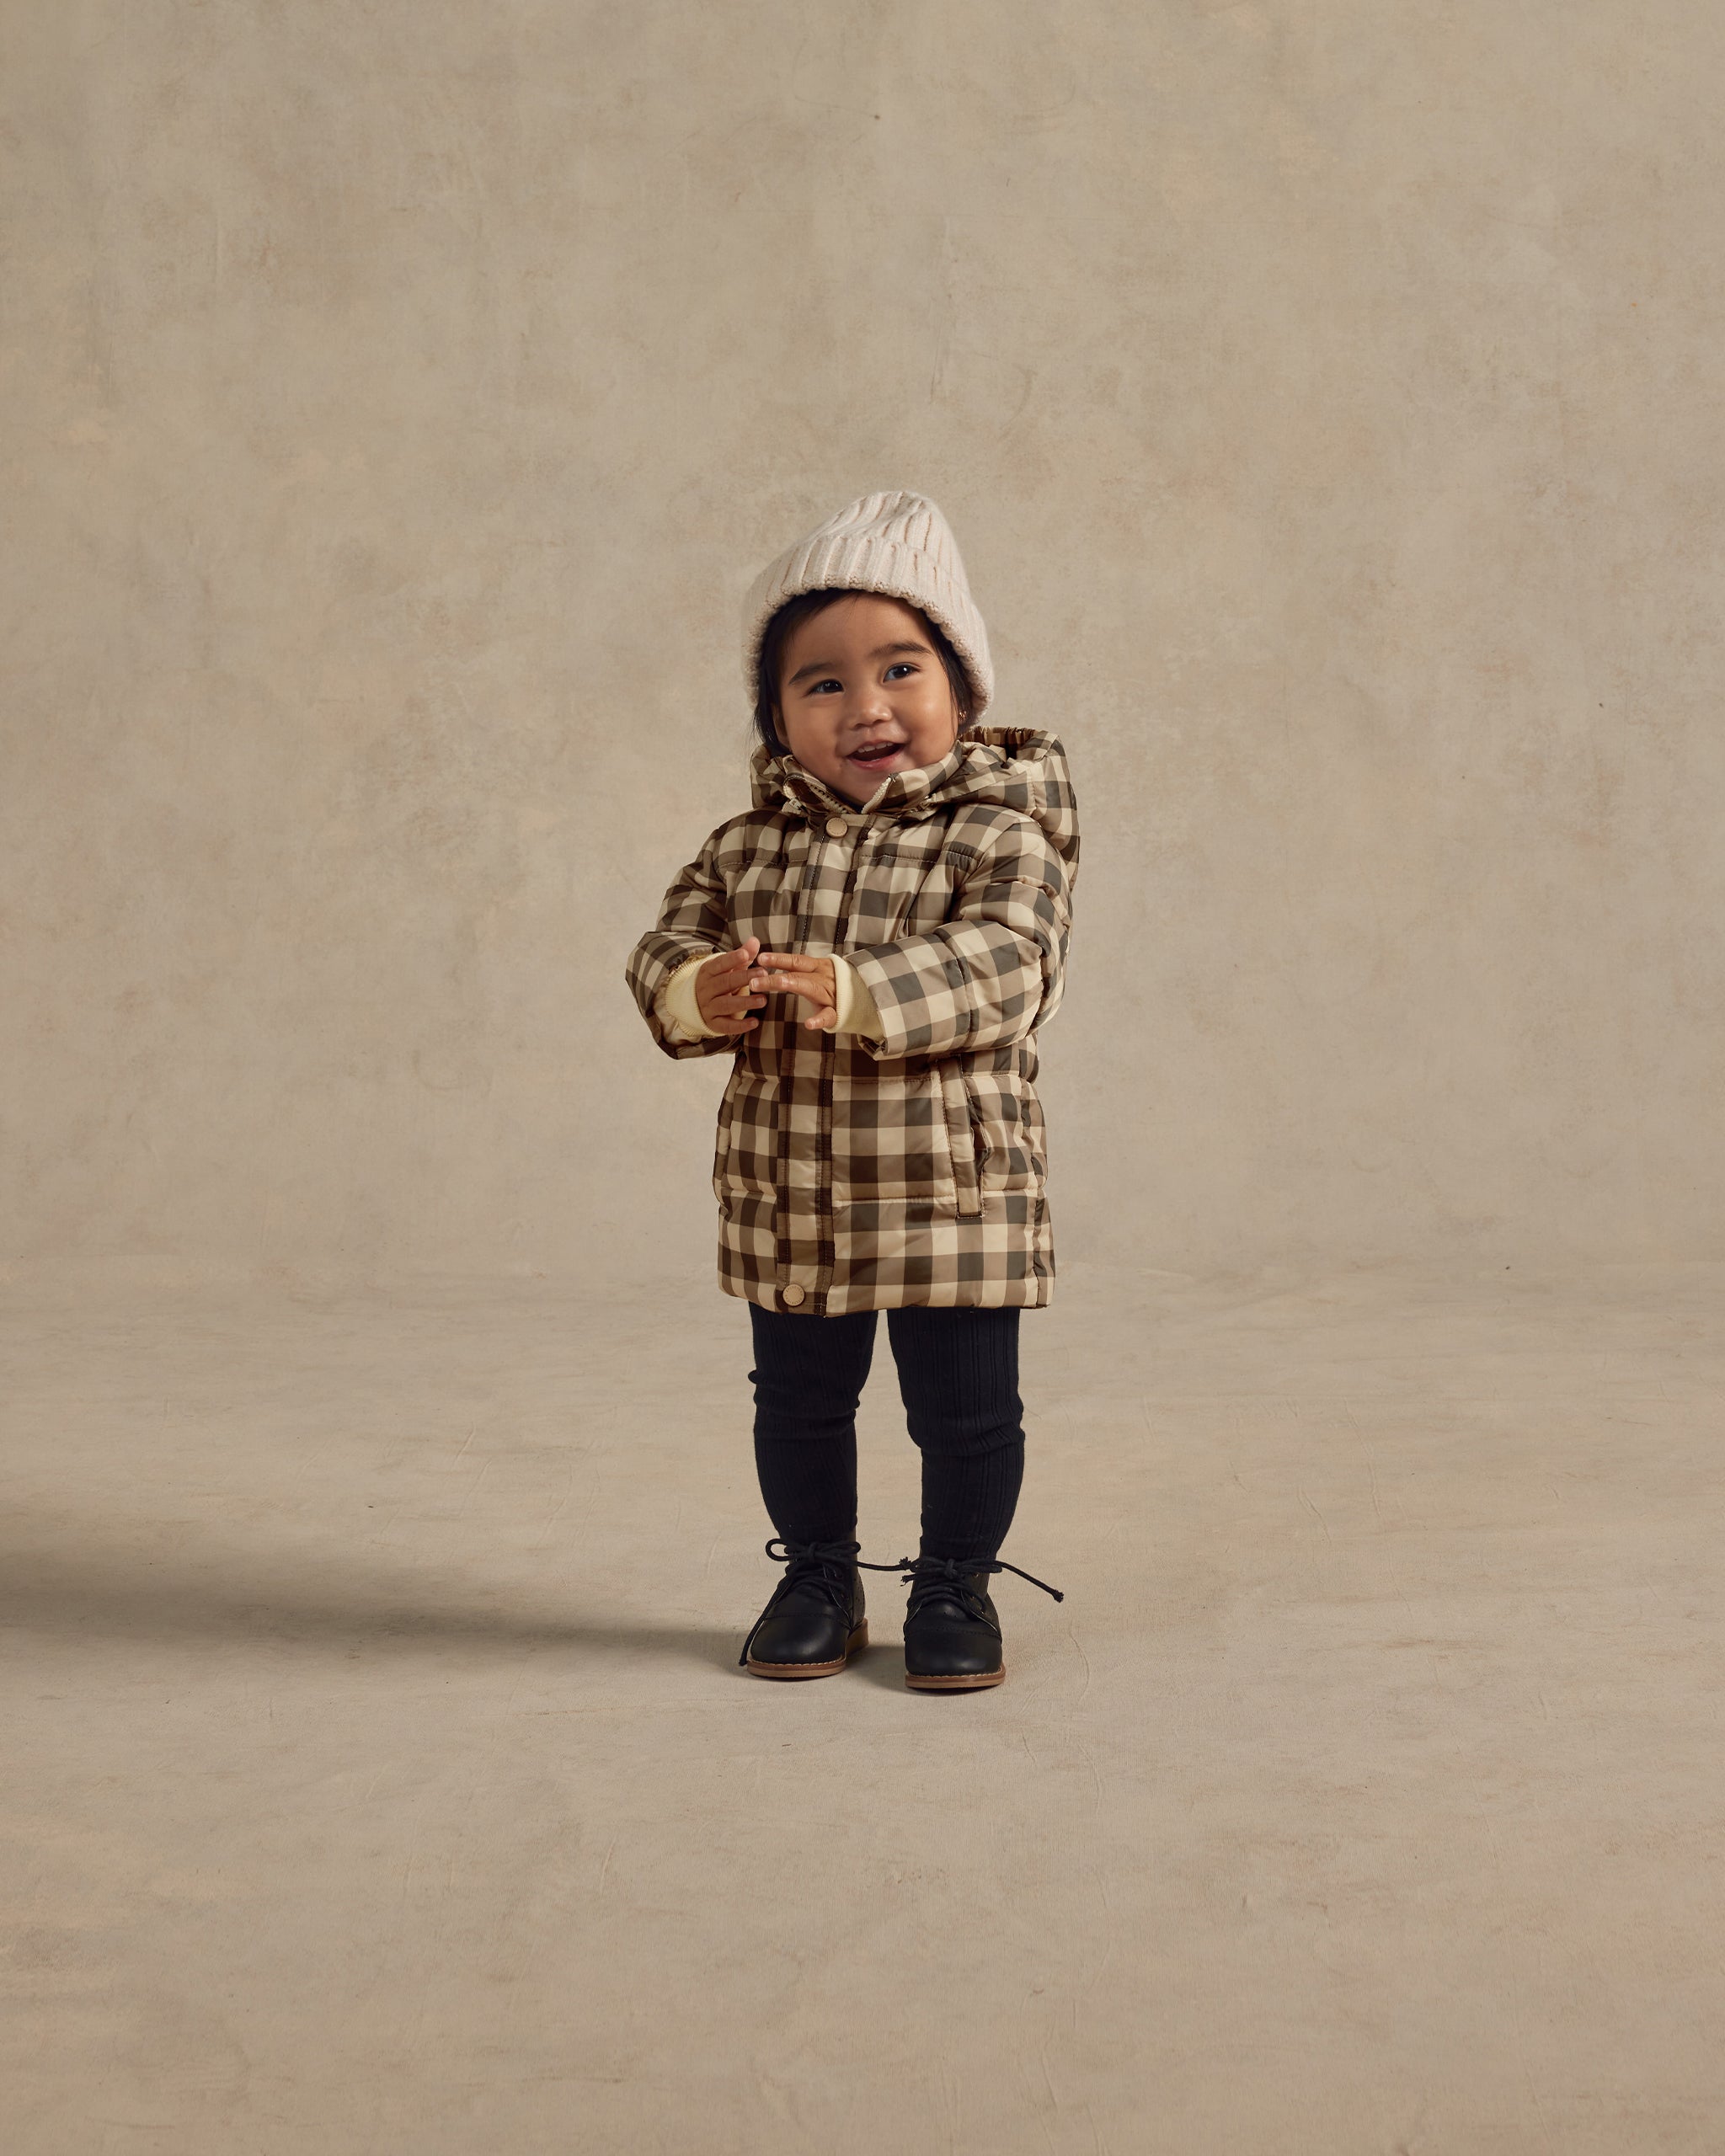 Ski Jacket || Charcoal Check - Rylee + Cru | Kids Clothes | Trendy Baby Clothes | Modern Infant Outfits |